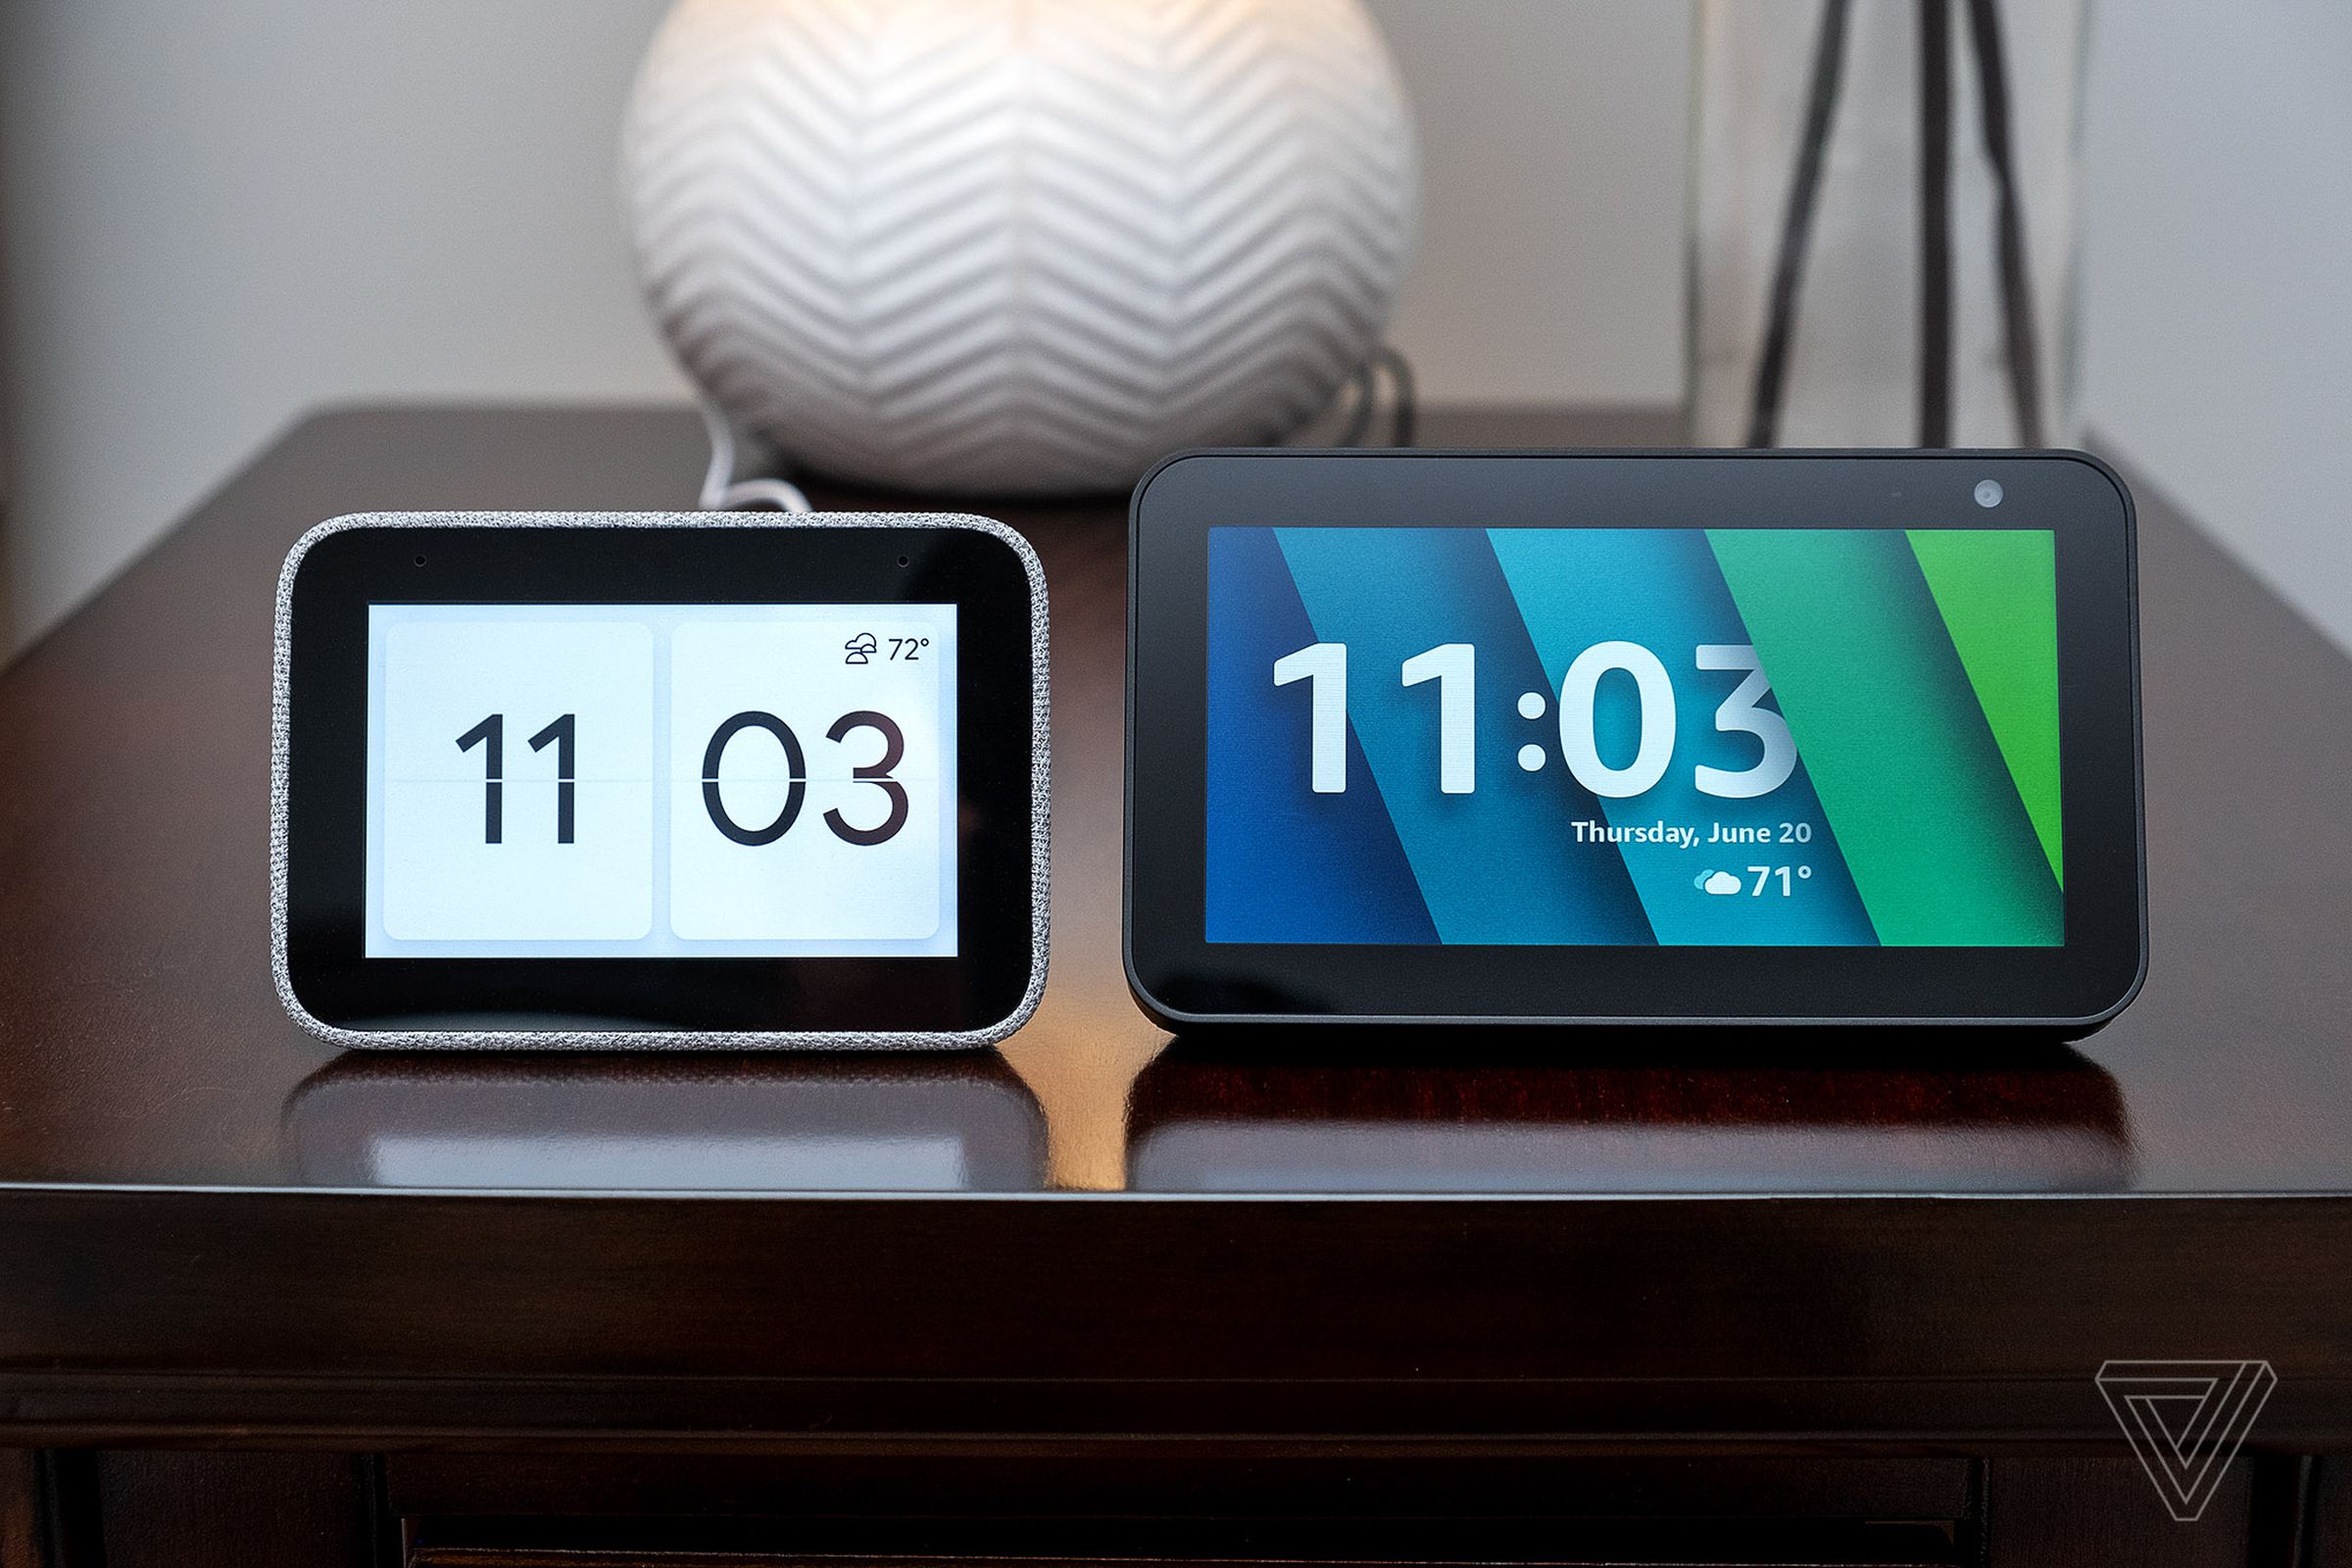 The Lenovo Smart Clock and the Echo Show 5 are two touchscreen smart alarm clocks that offer a myriad of smart features, but can’t be guaranteed to wake you up.